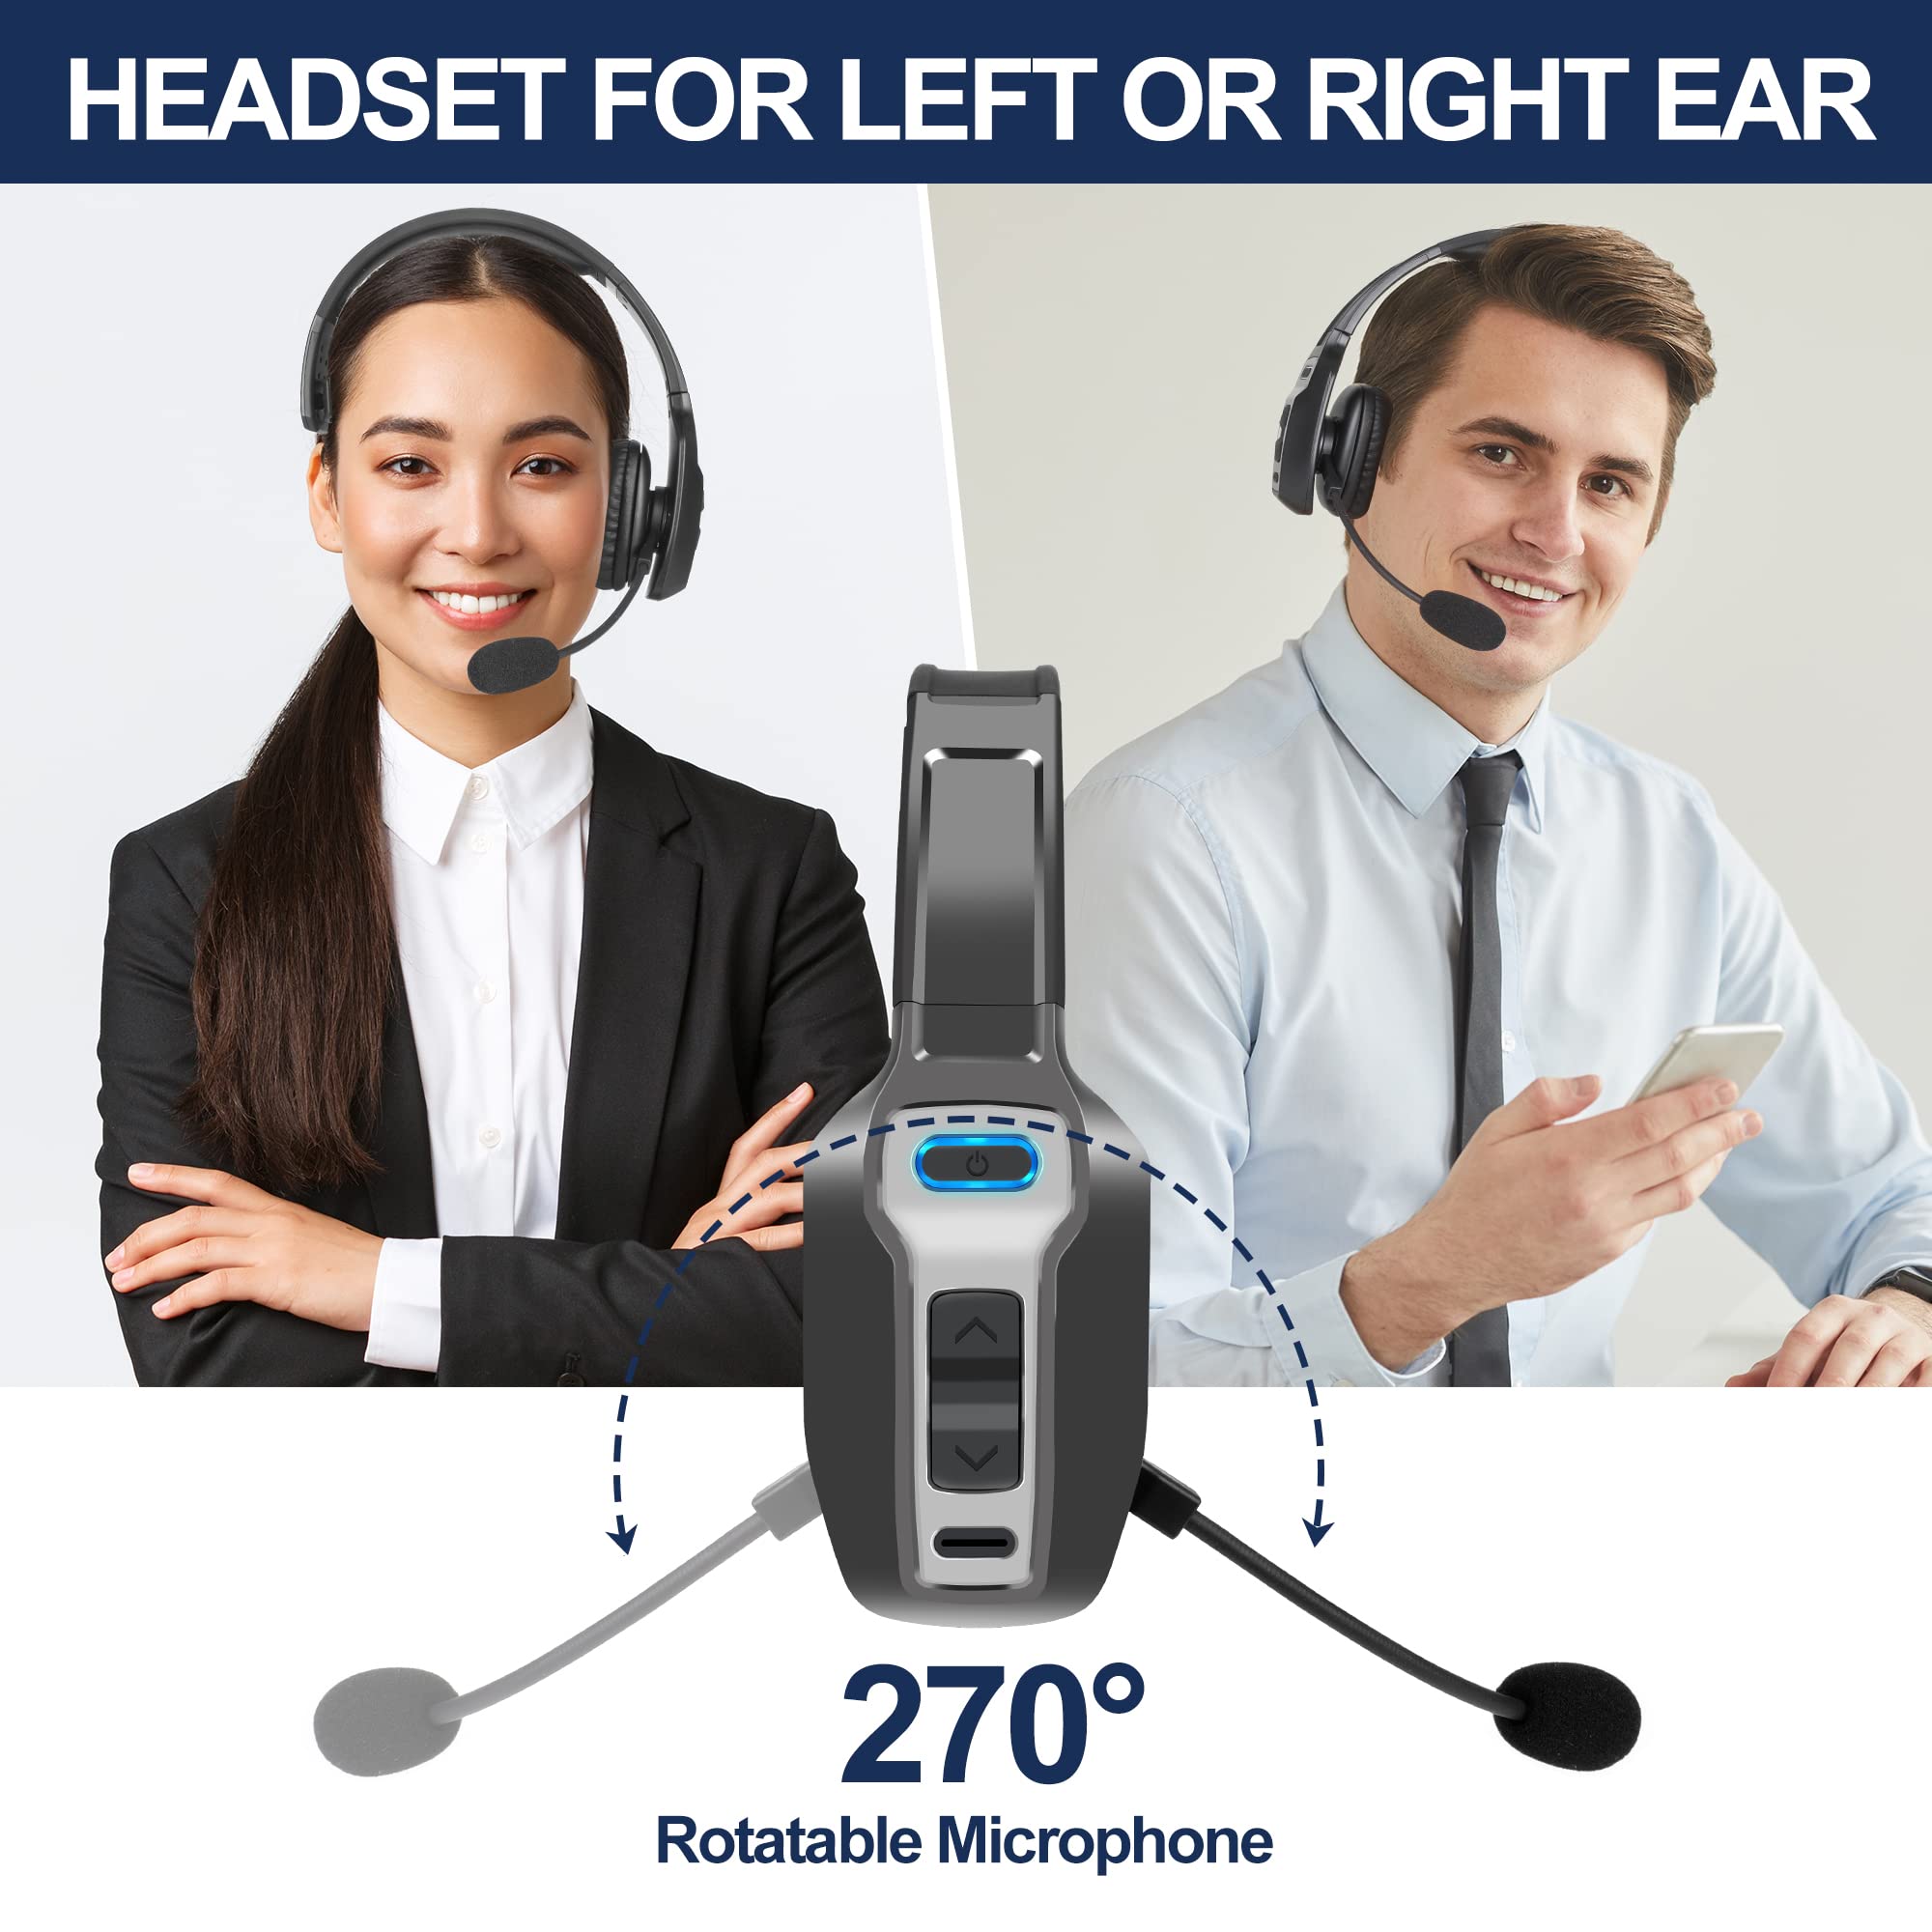 Sarevile Trucker Bluetooth Headset, V5.2 Wireless Headset with Upgraded Microphone AI Noise Canceling, On Ear Bluetooth Headphone with Mute for Driver Office Call Center